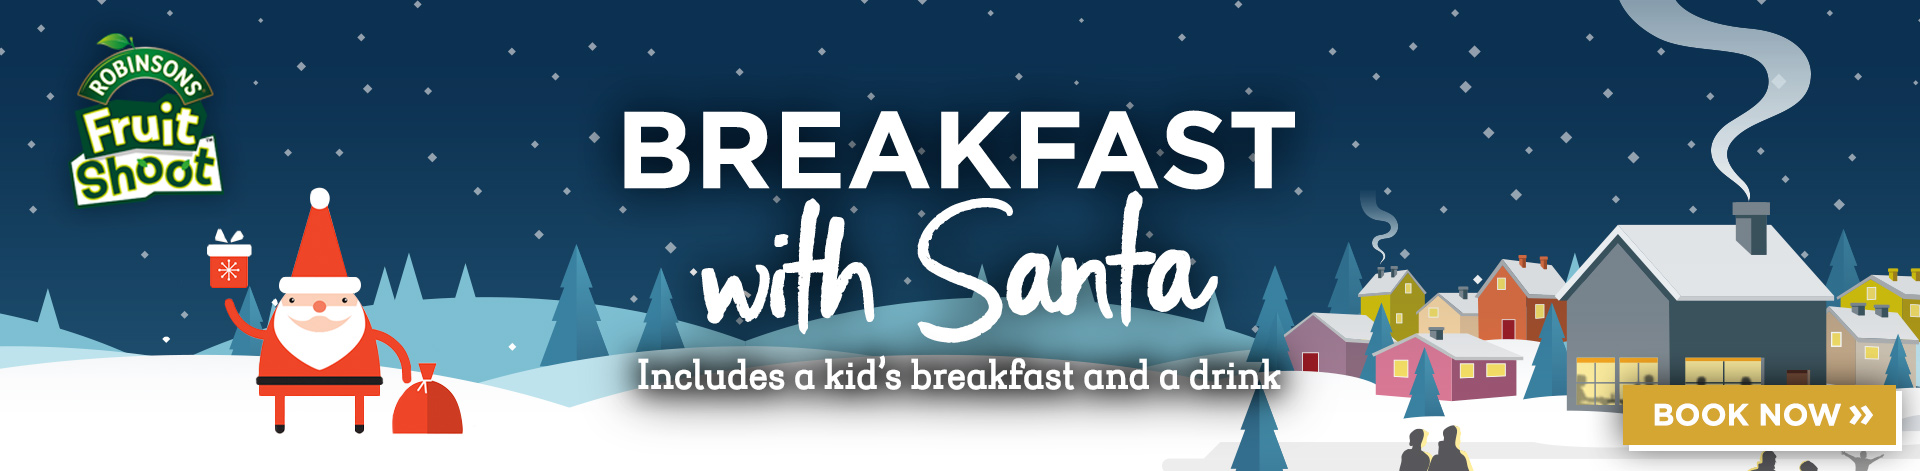 Breakfast with Santa menu at The Woodend